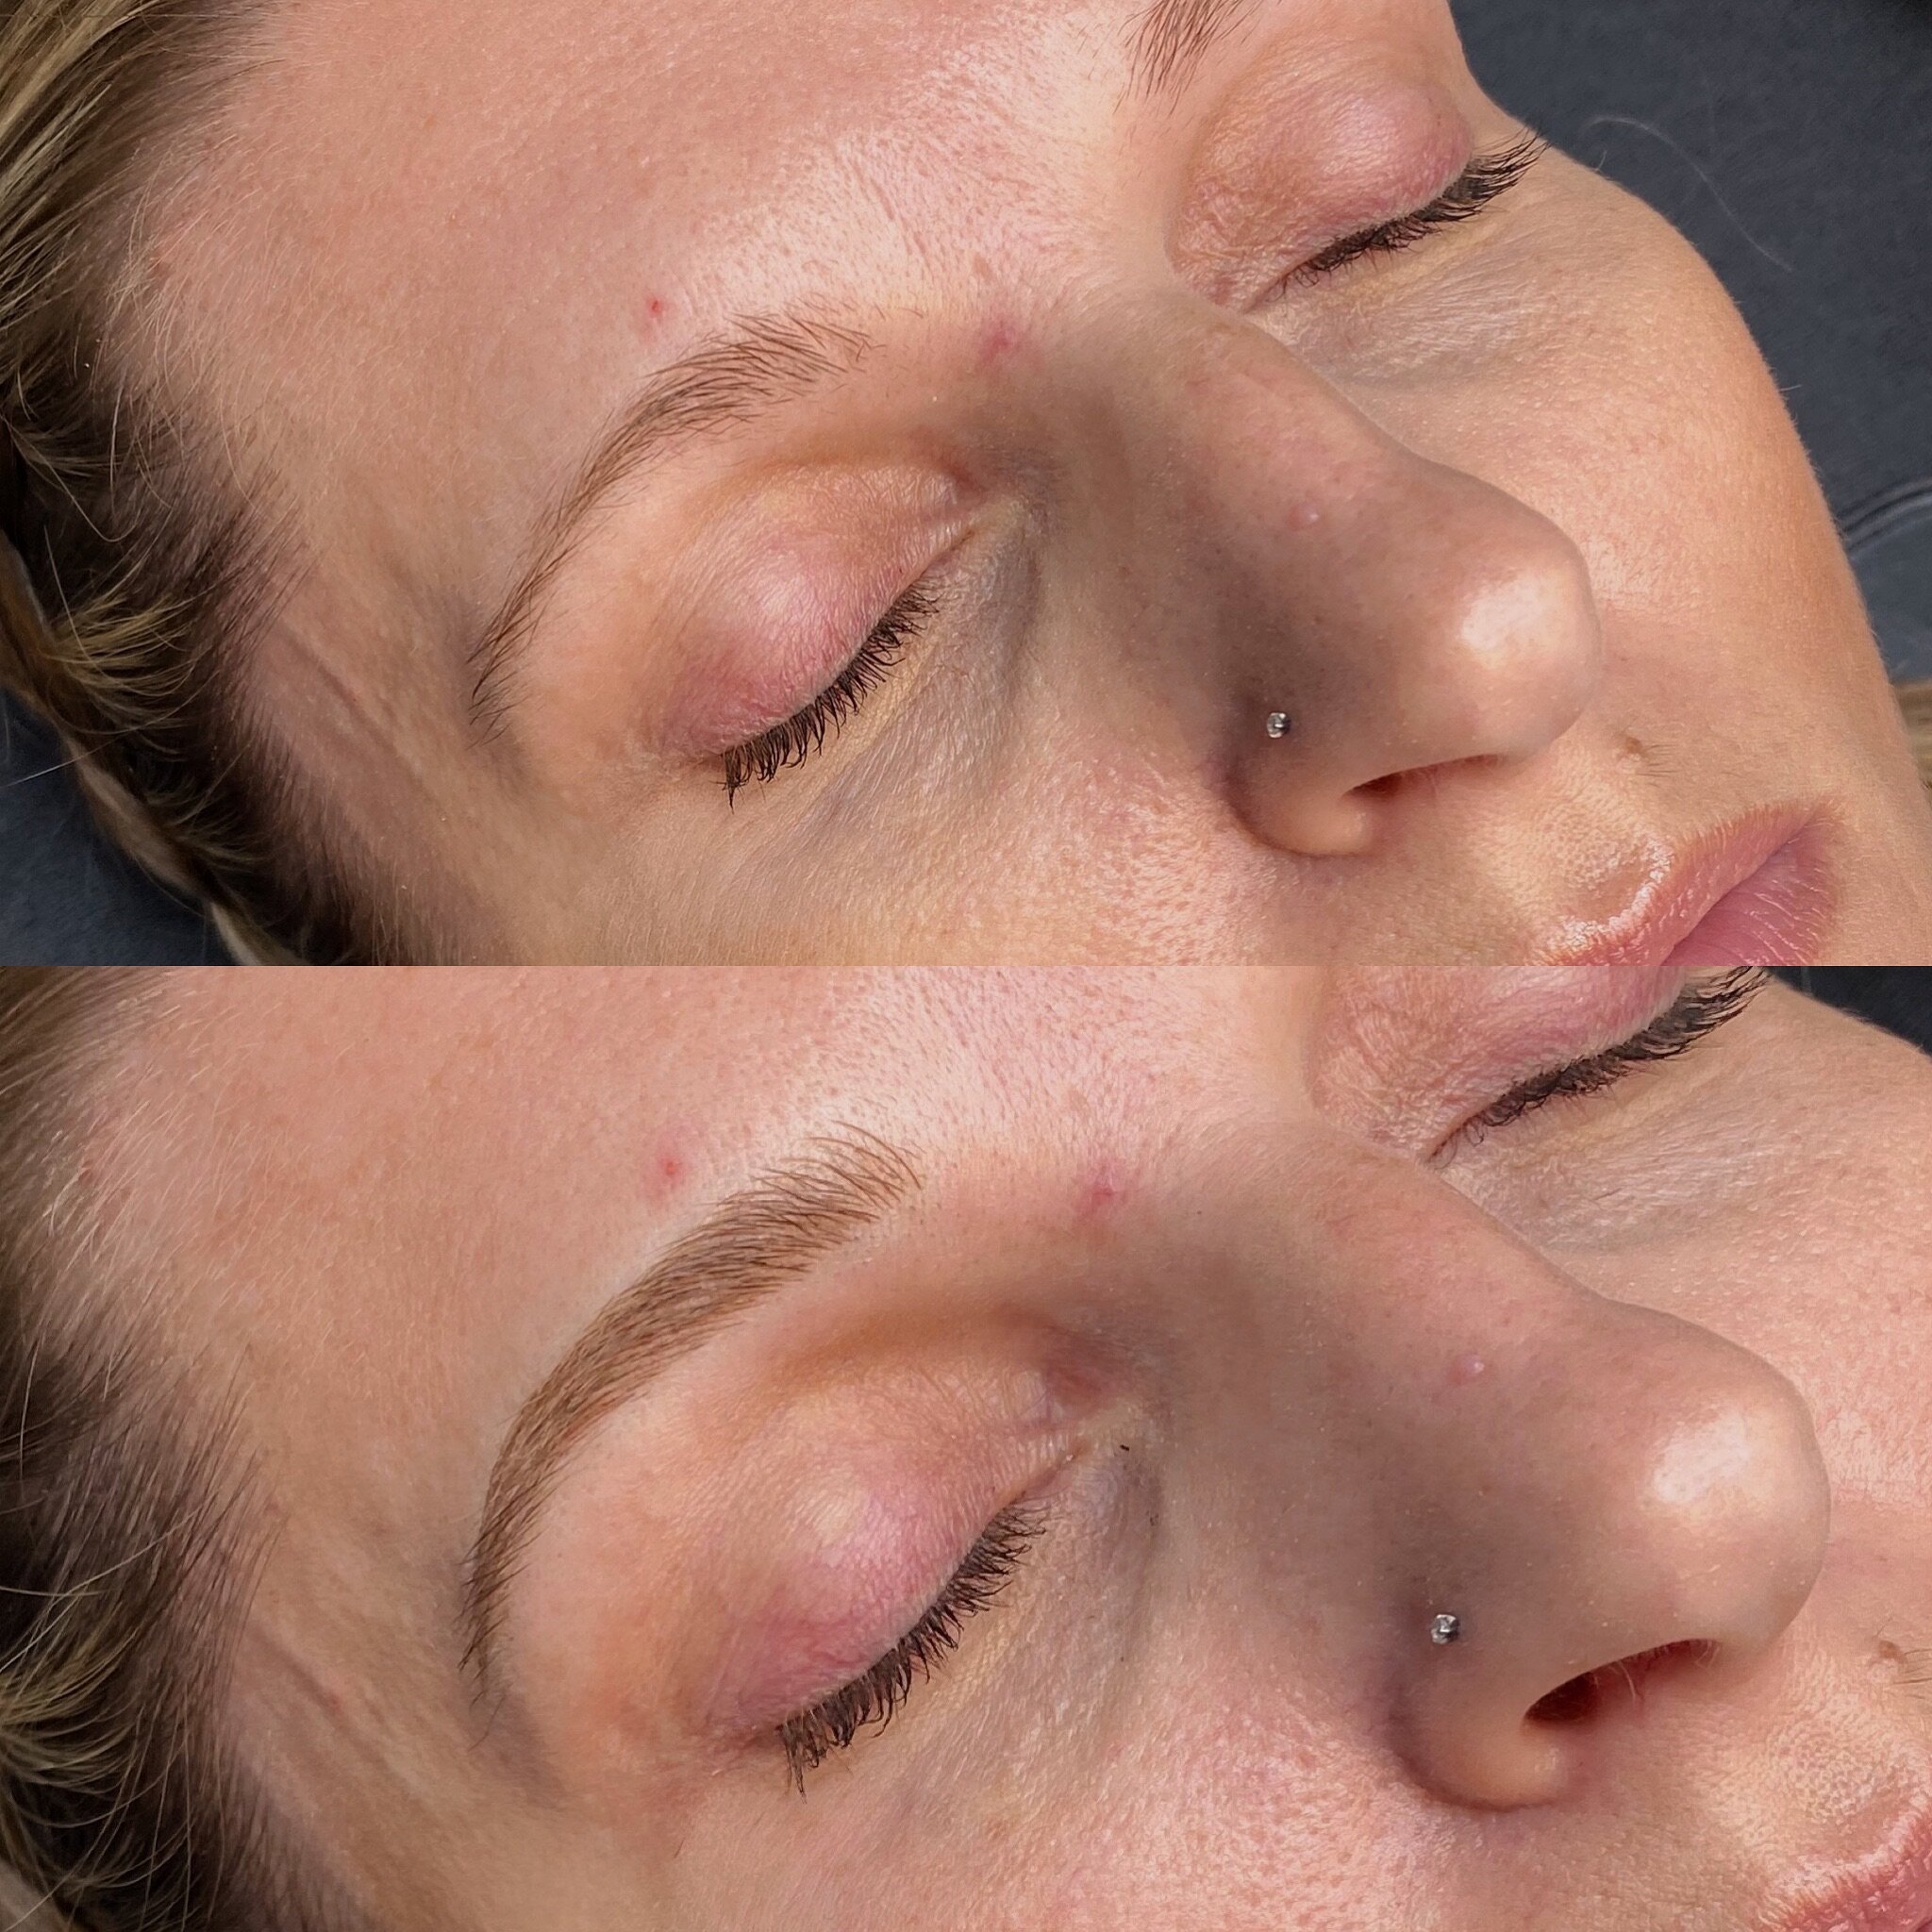 Not every transformation will be dramatic, nor should it be. At Arch &amp; Edge we like to enhance what you have ✨ creating the perfect brow specific to you &amp; your goals. 

| ʙʀᴏᴡꜱ ʙʏ ʟɪꜱᴀ |